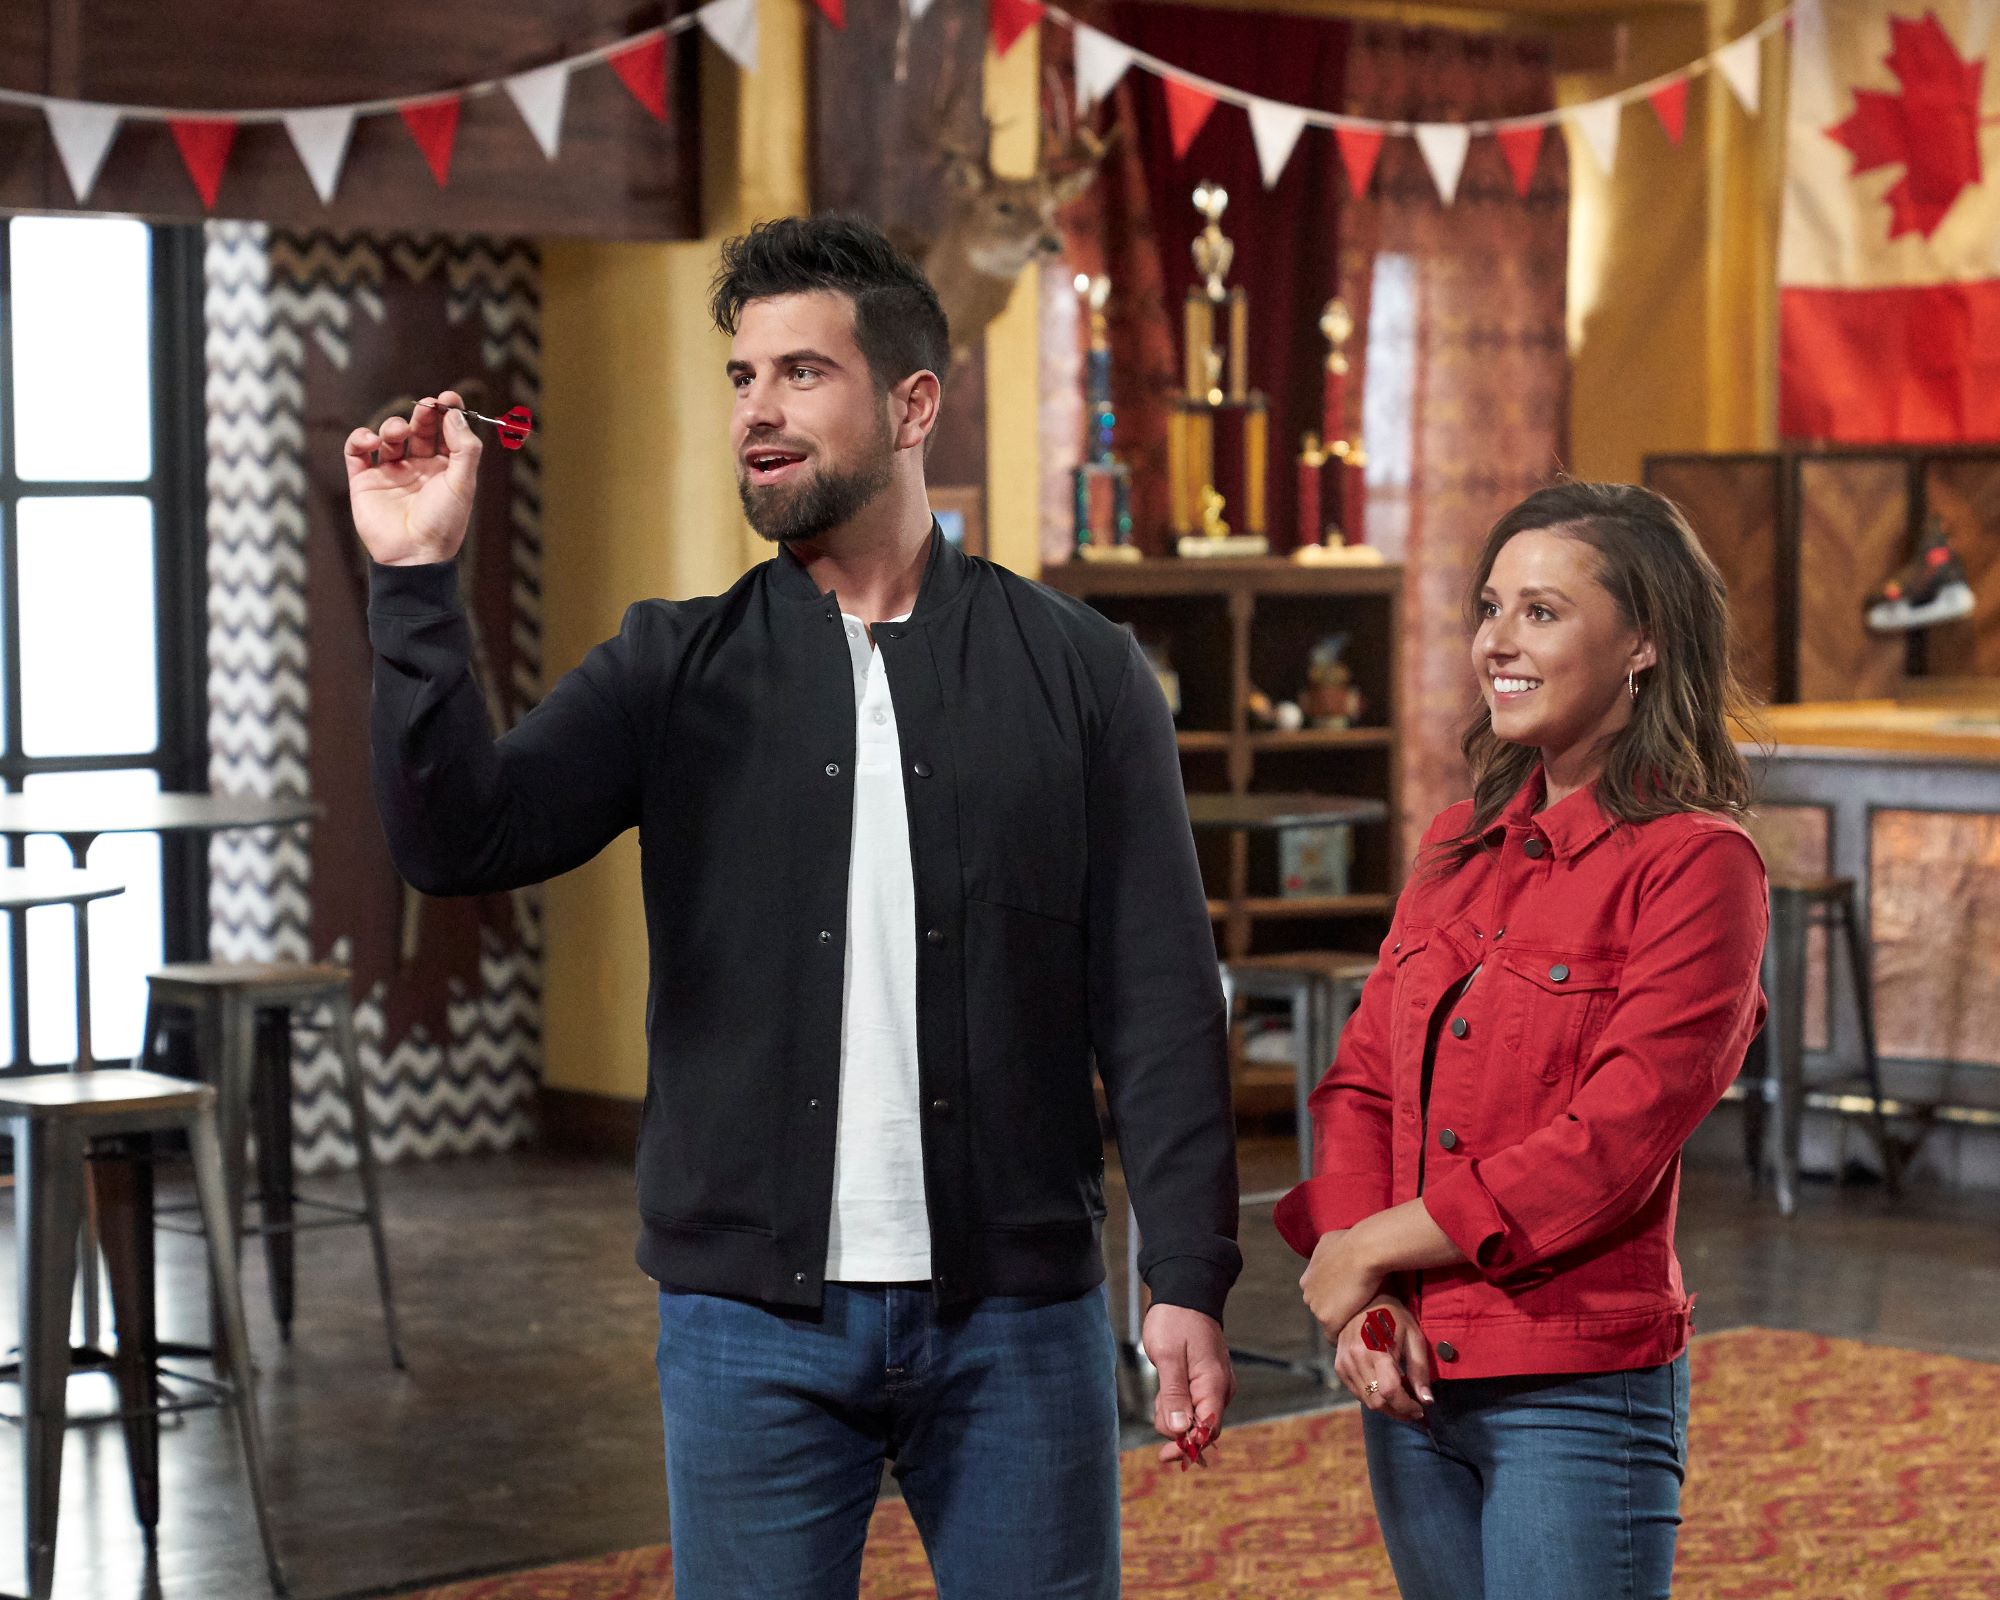 'The Bachelorette' stars Blake Moynes and Katie Thurston play darts. Blake wears a black jacket over a white shirt and jeans. Katie wears a red jacket and jeans.